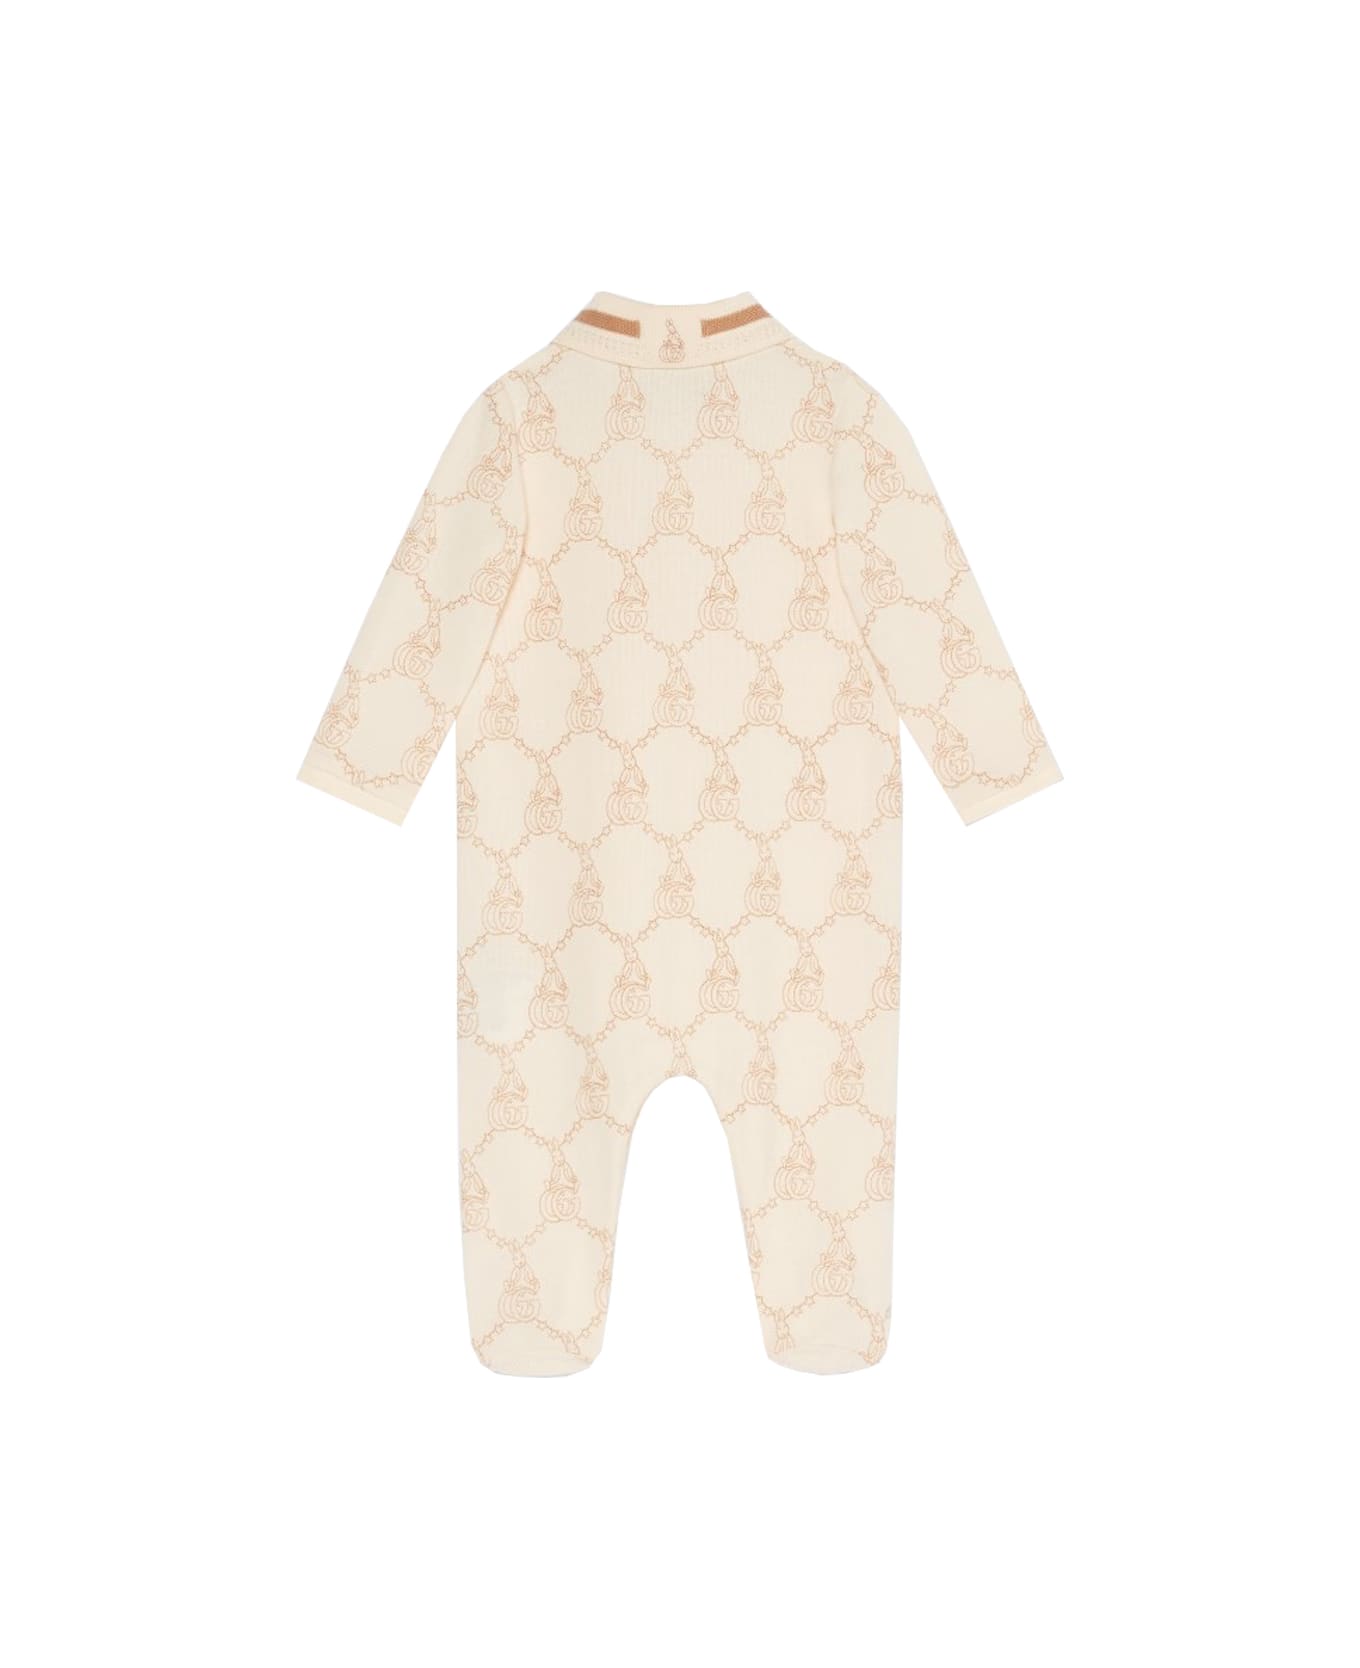 Gucci Romper With Embroidery - Beige